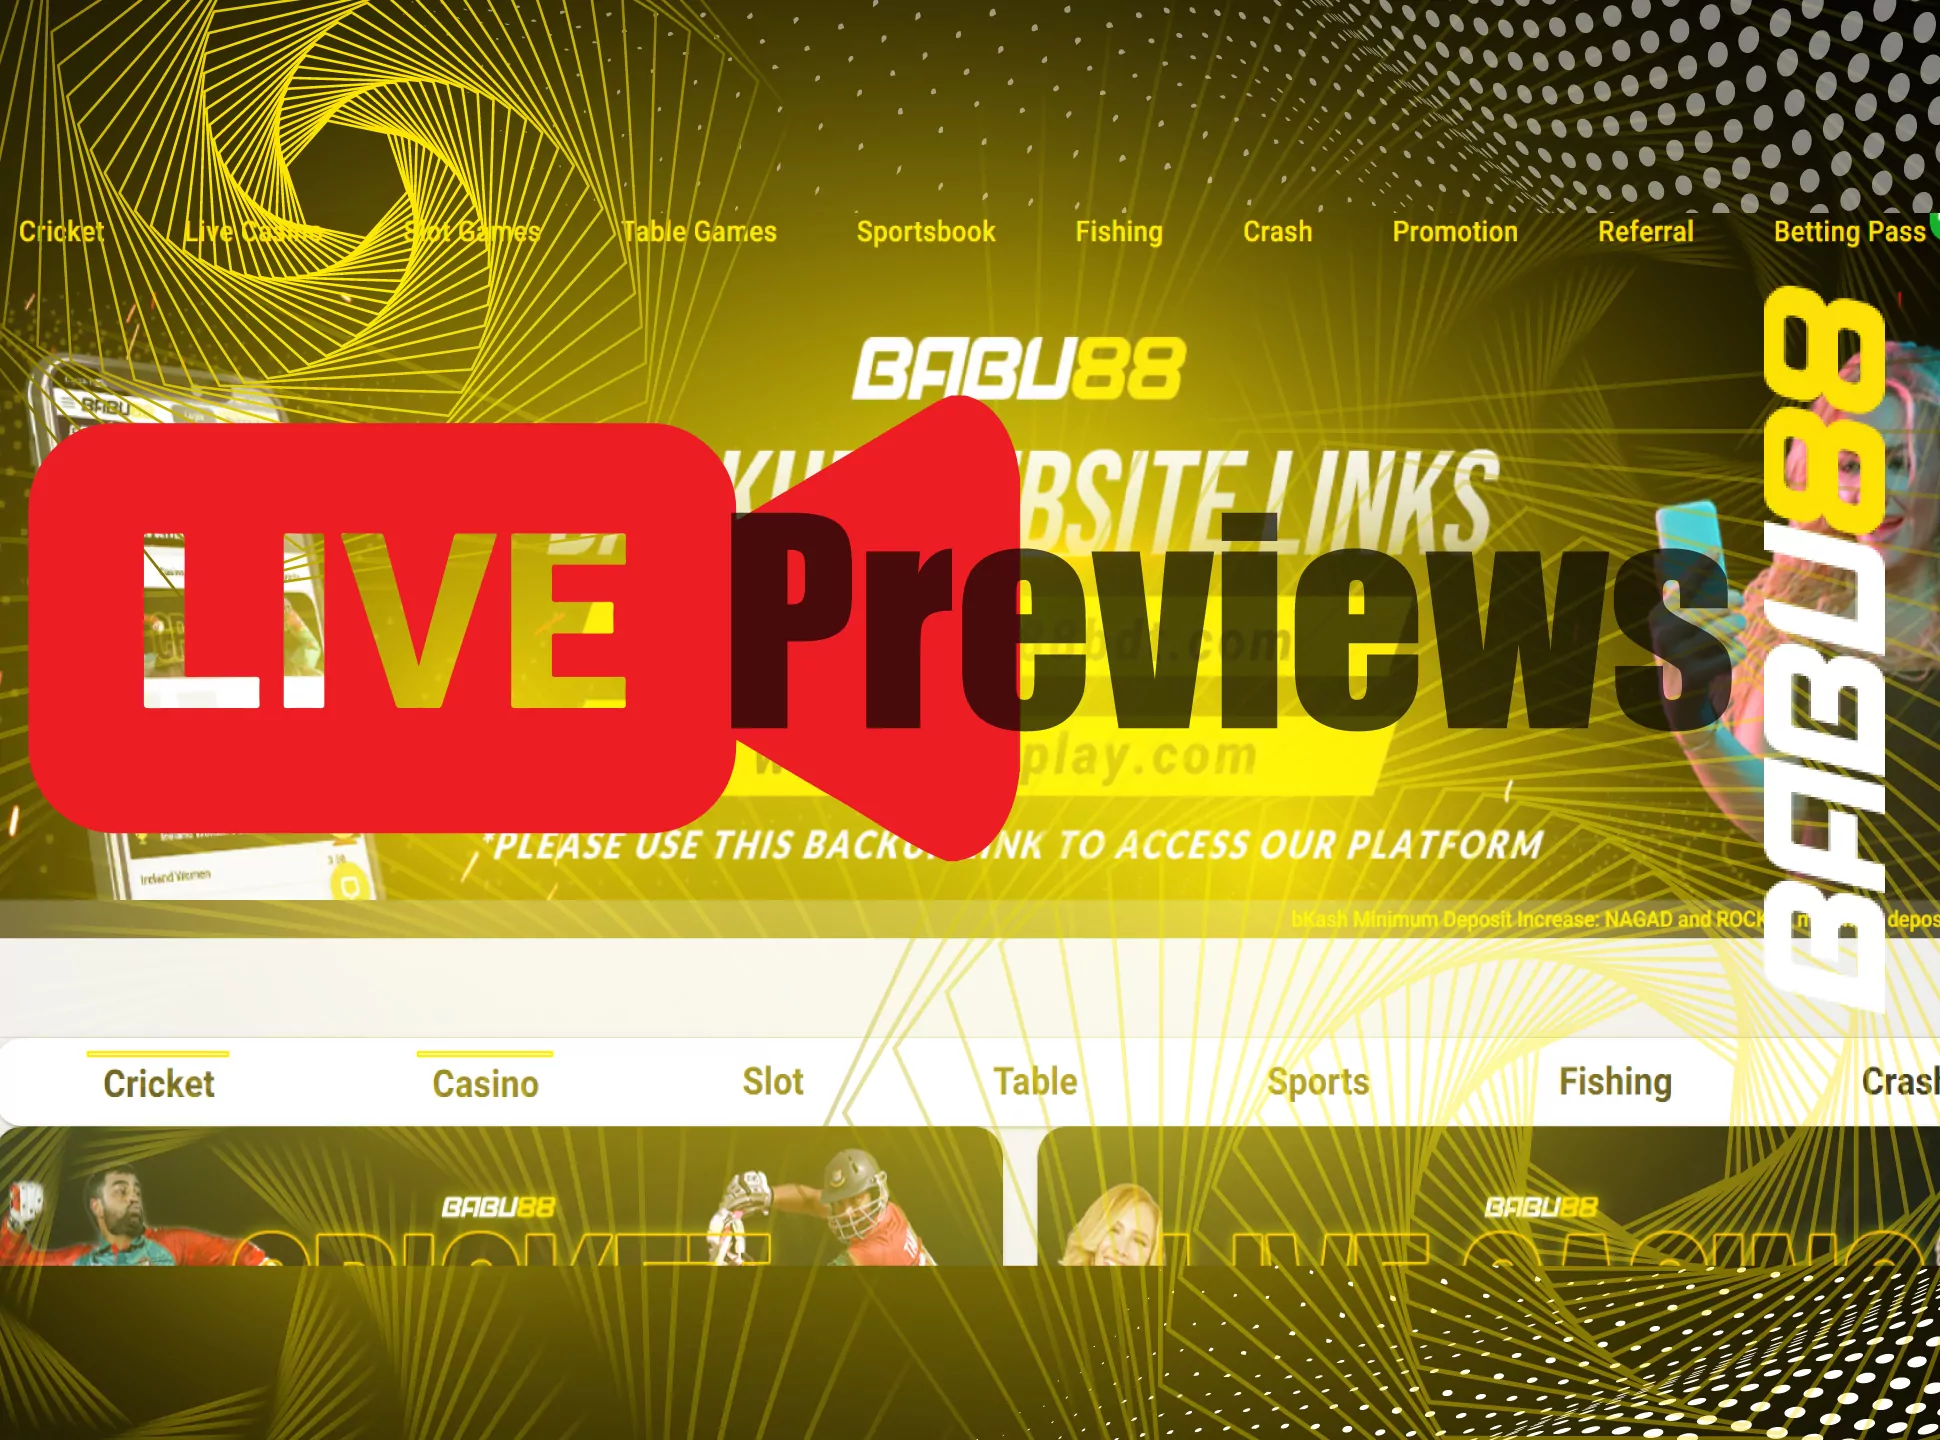 There is also a live preview function at Babu88.